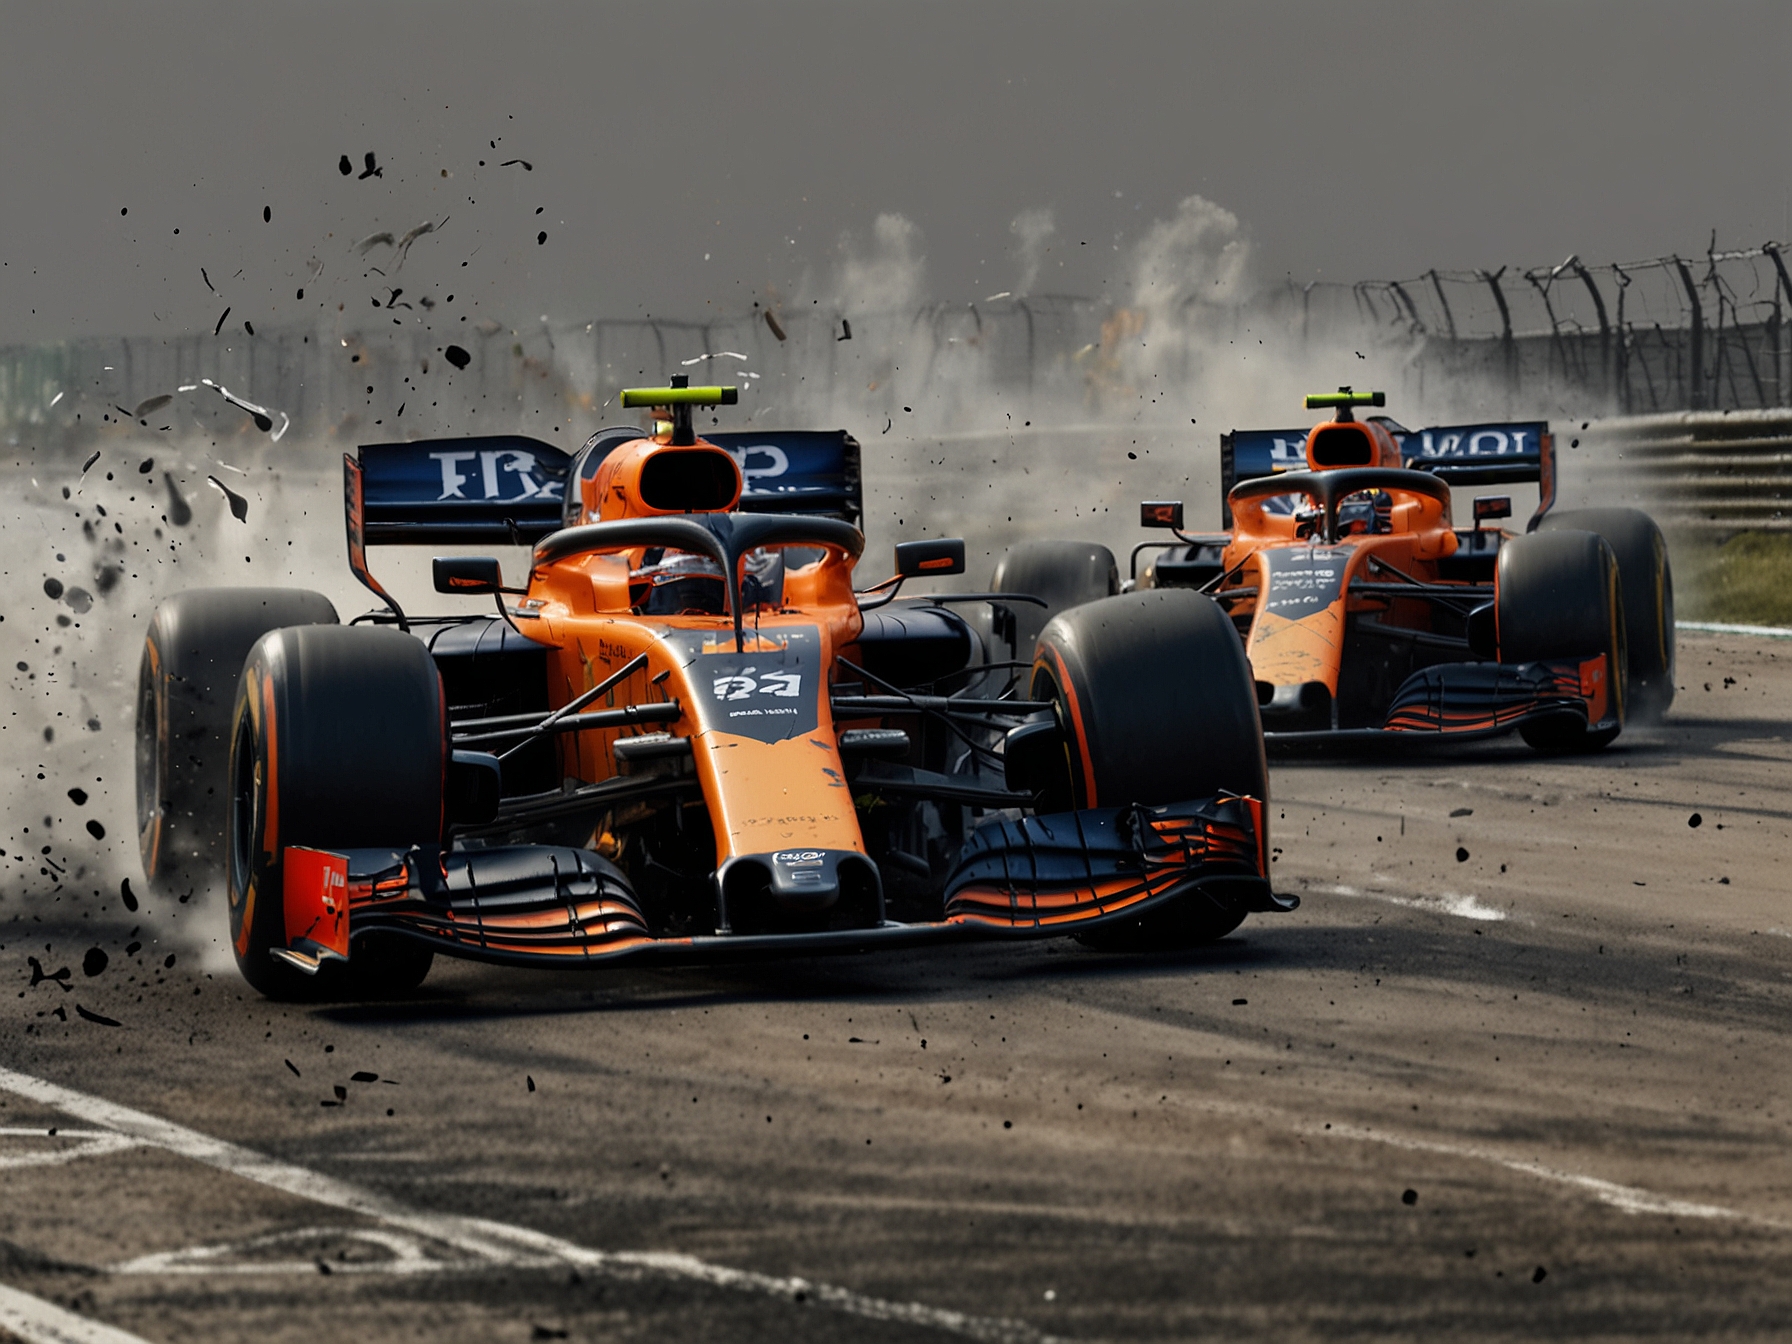 A detailed image showing the aftermath of the collision between Max Verstappen and Lando Norris, with both cars spun off track, illustrating the high stakes of their championship rivalry.